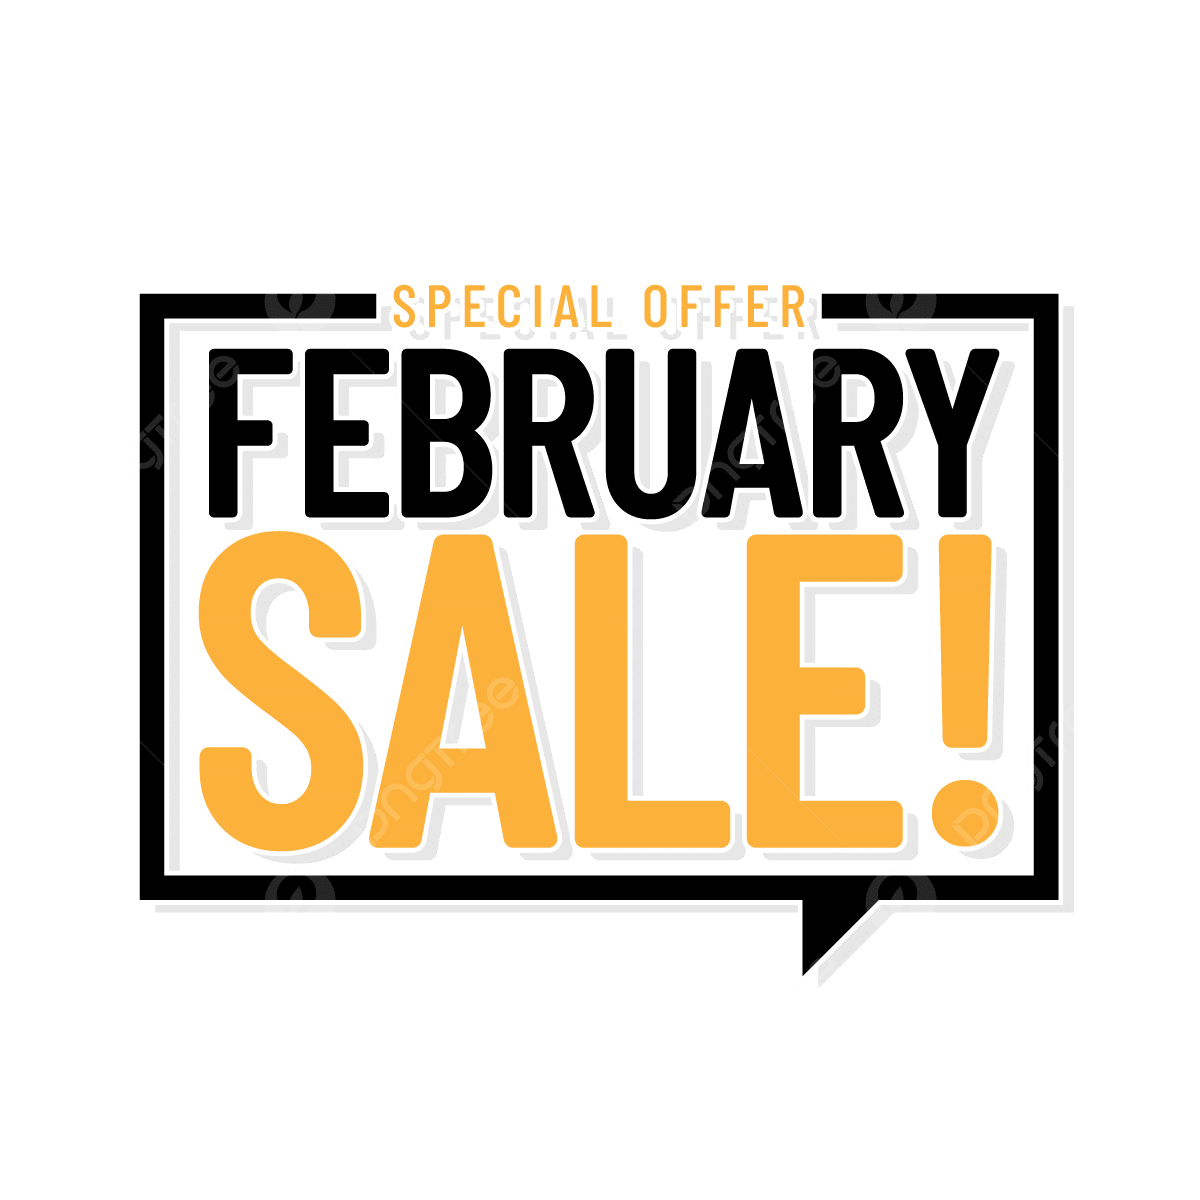 pngtree-february-sale-special-offer-png-image_6963165